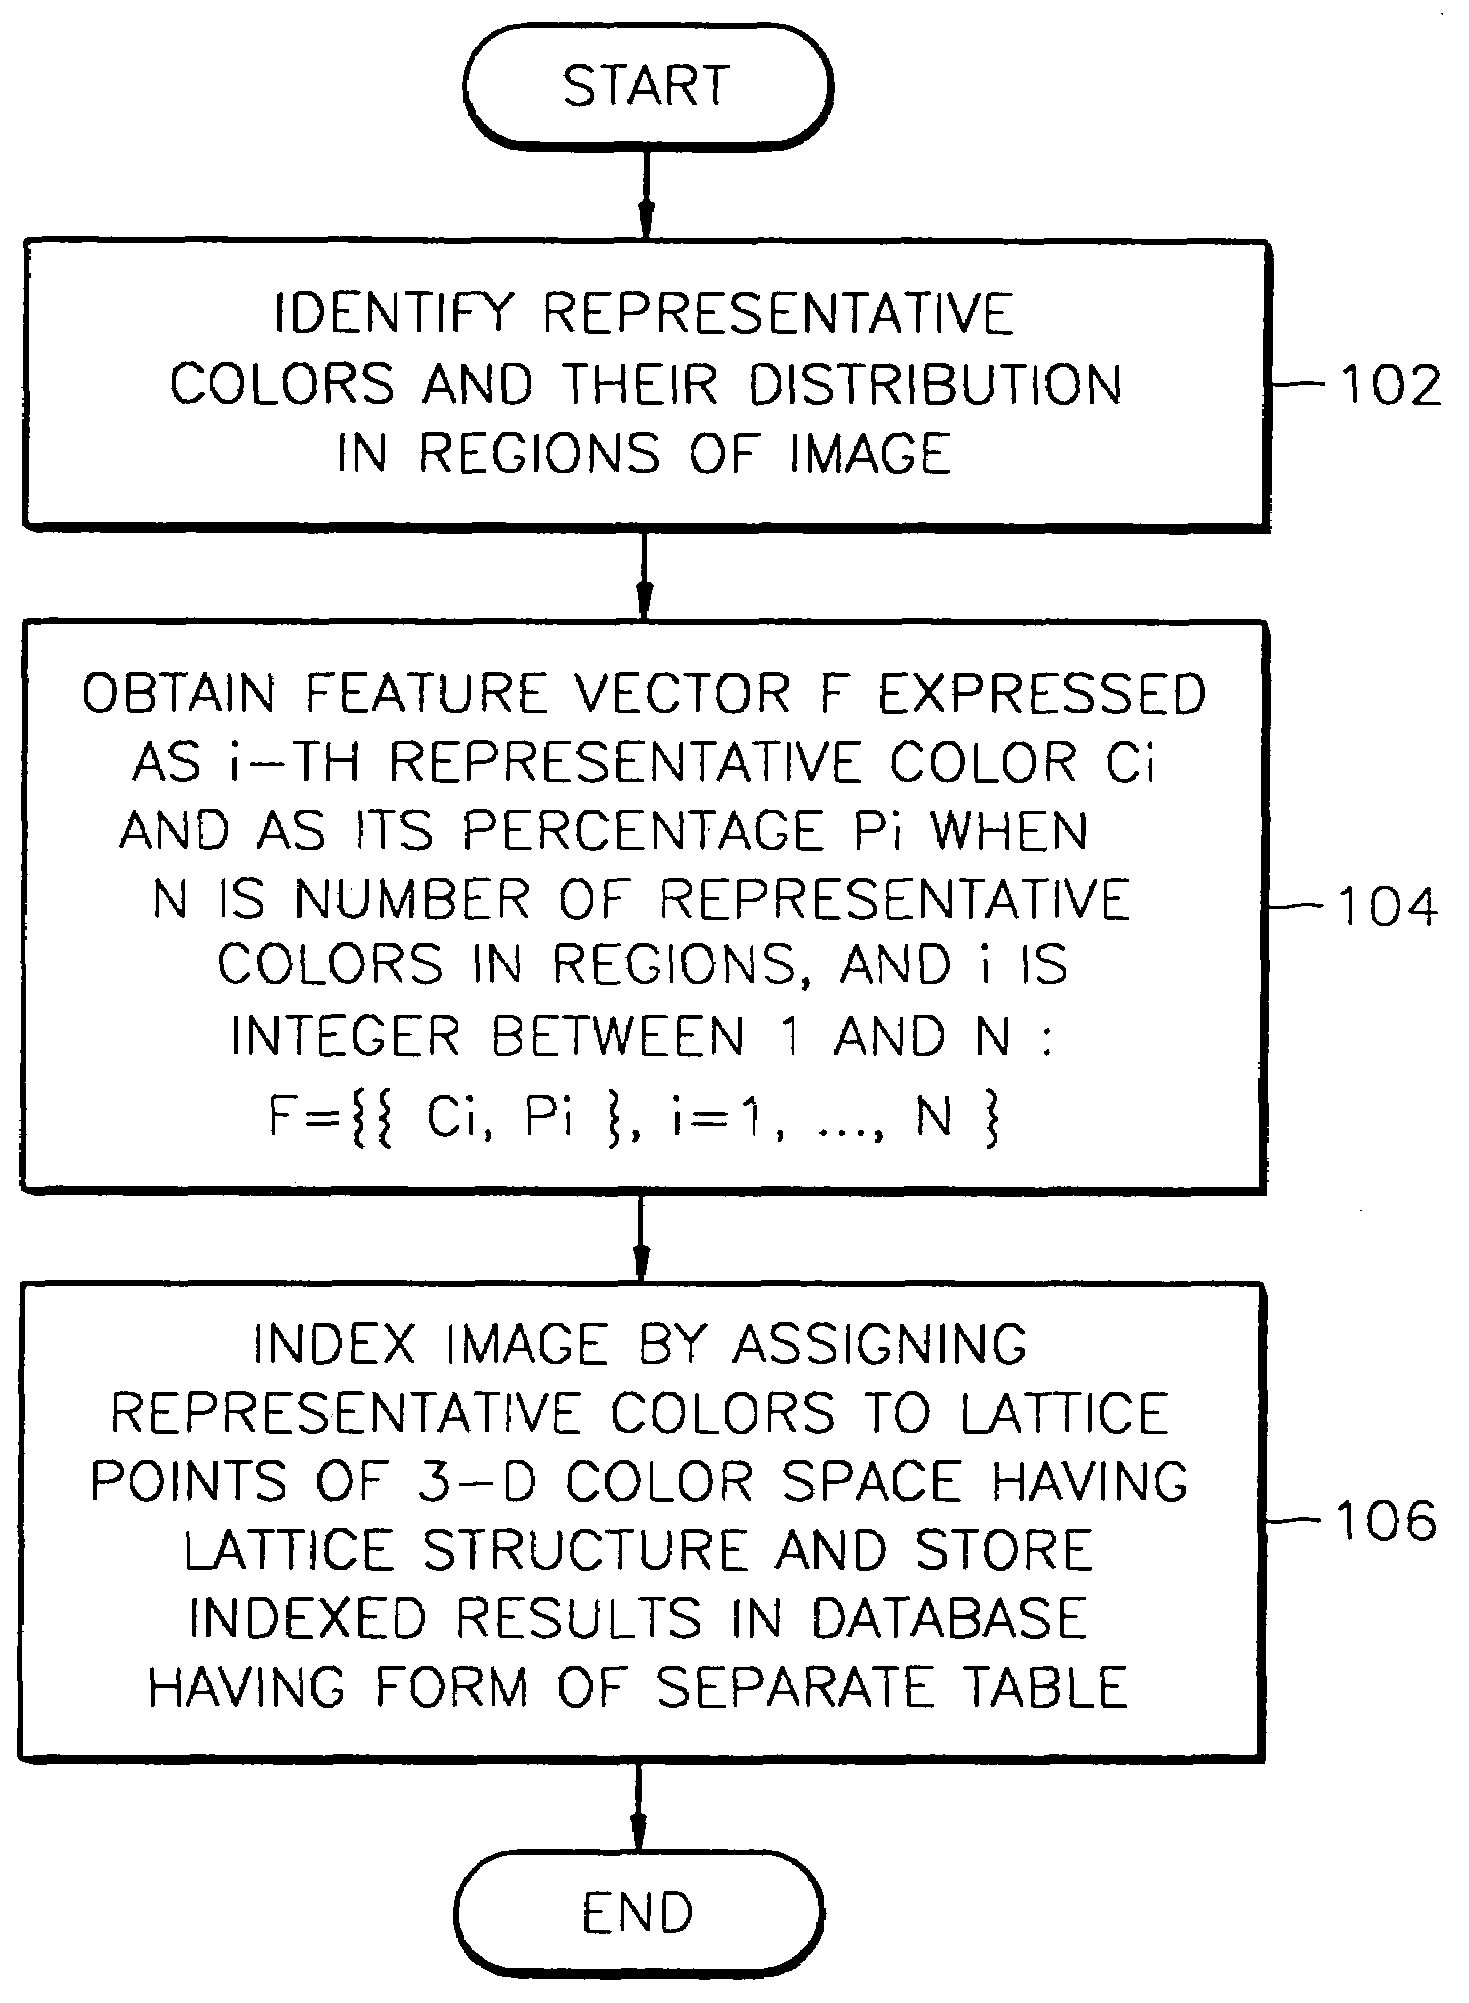 Color image processing method for indexing an image using a lattice structure